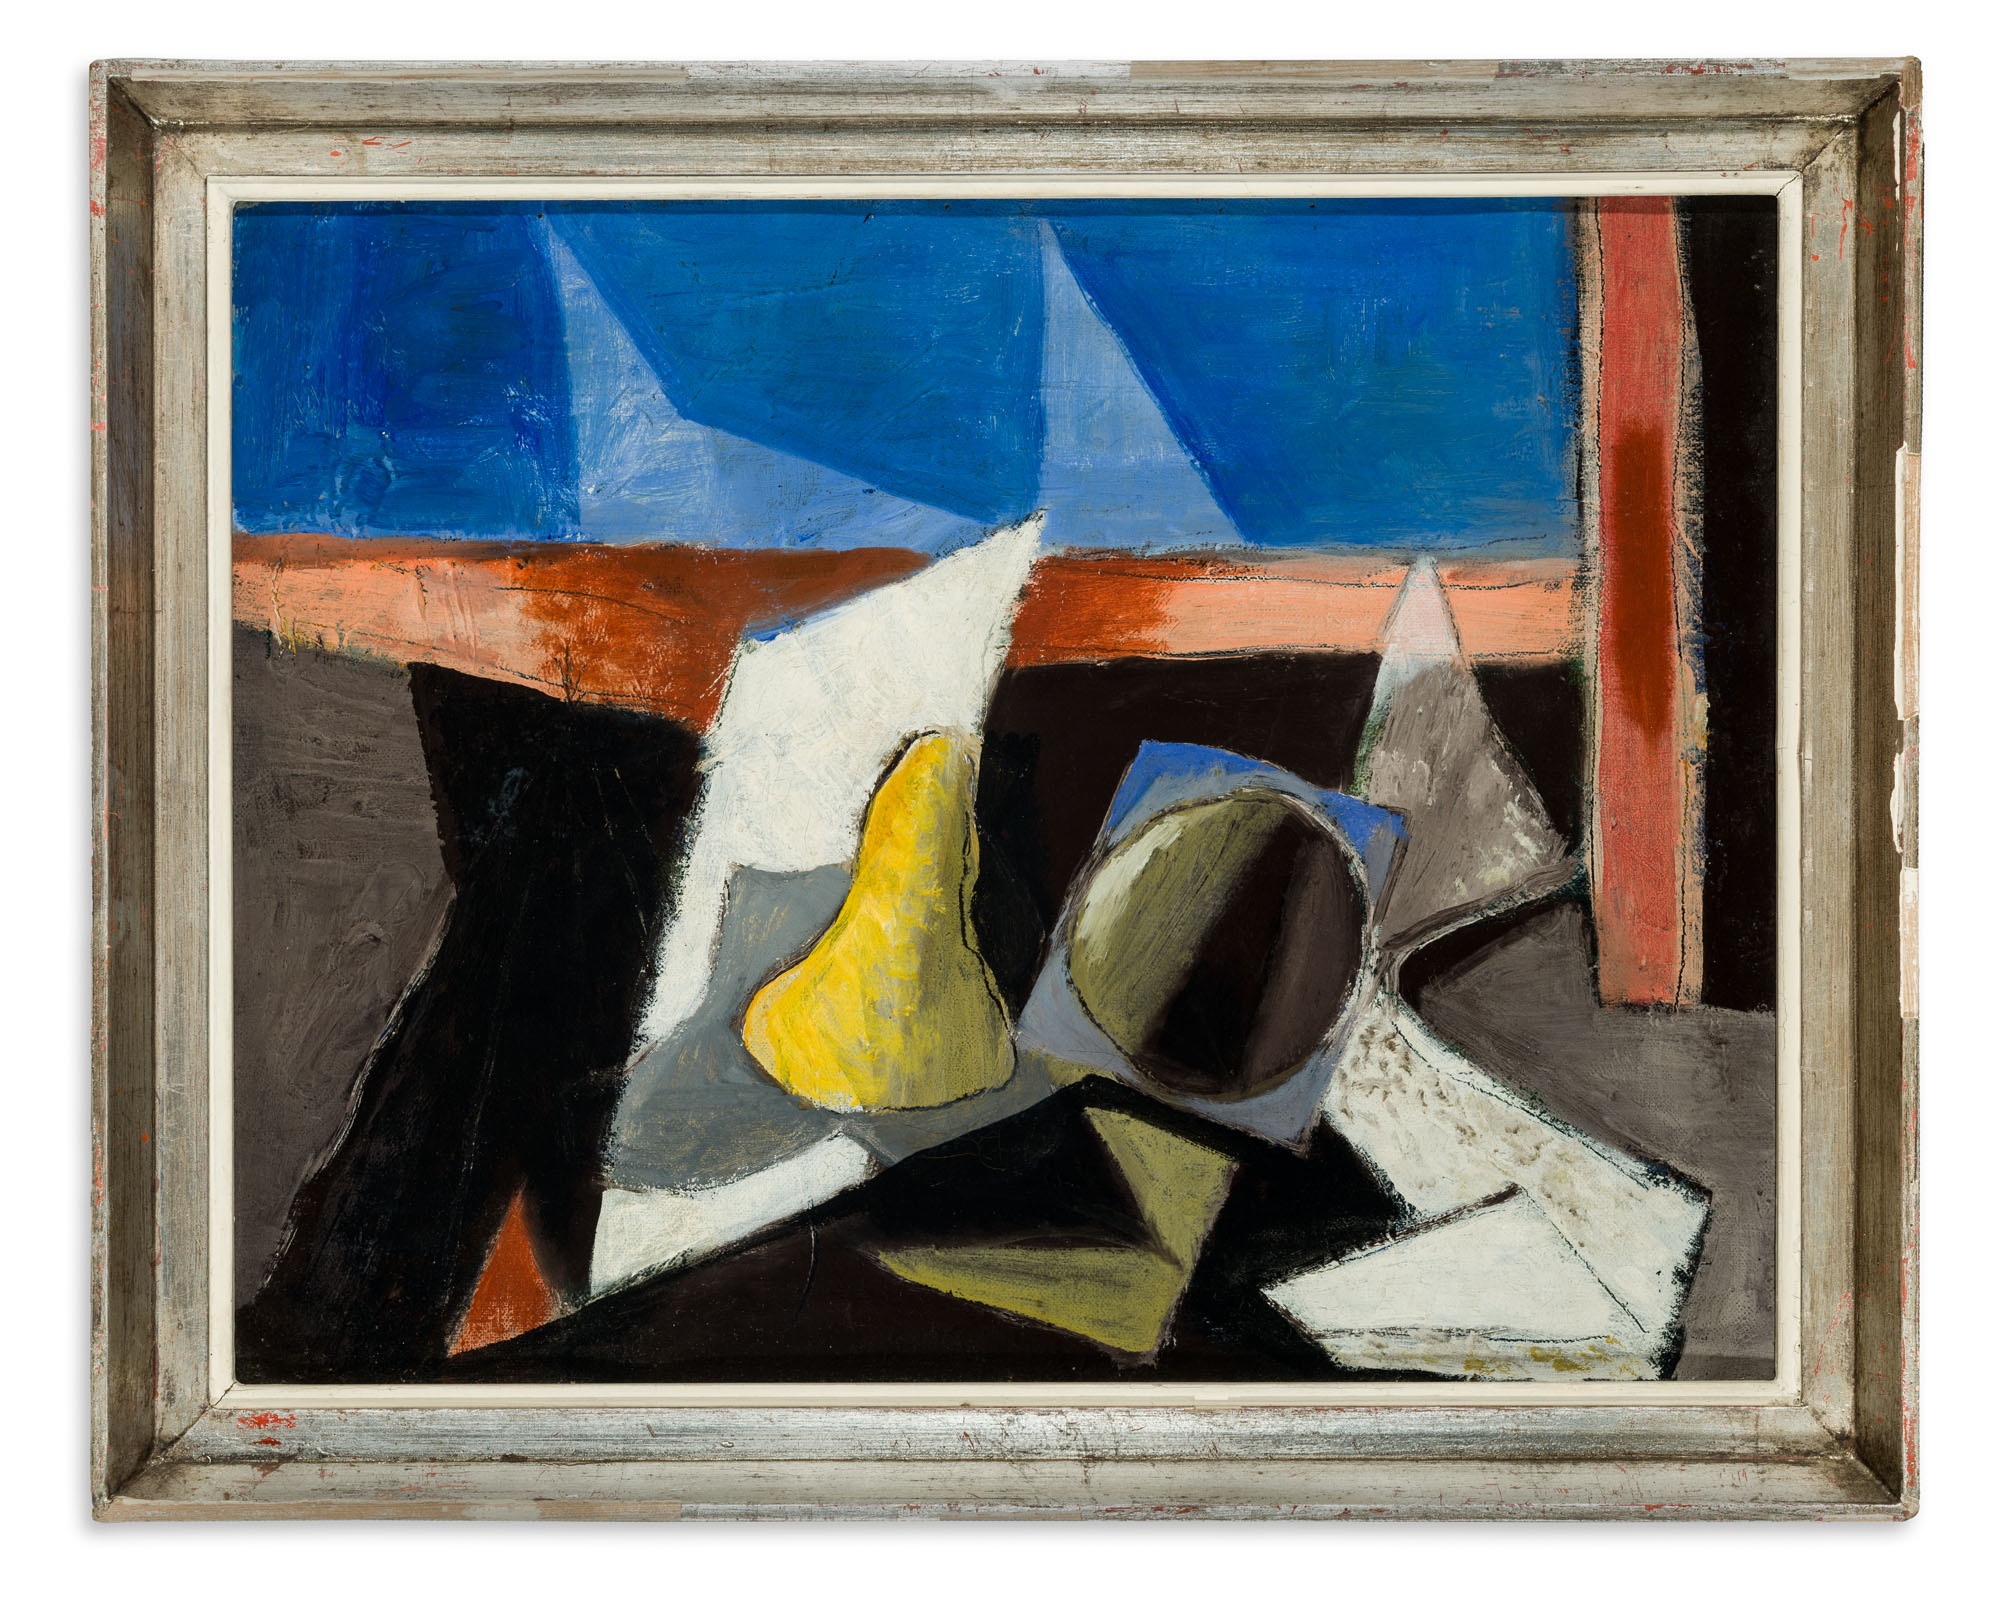 Jenő  Gadányi: untitled (abstract still life) (The Salgo Trust for Education CC BY-NC-SA)